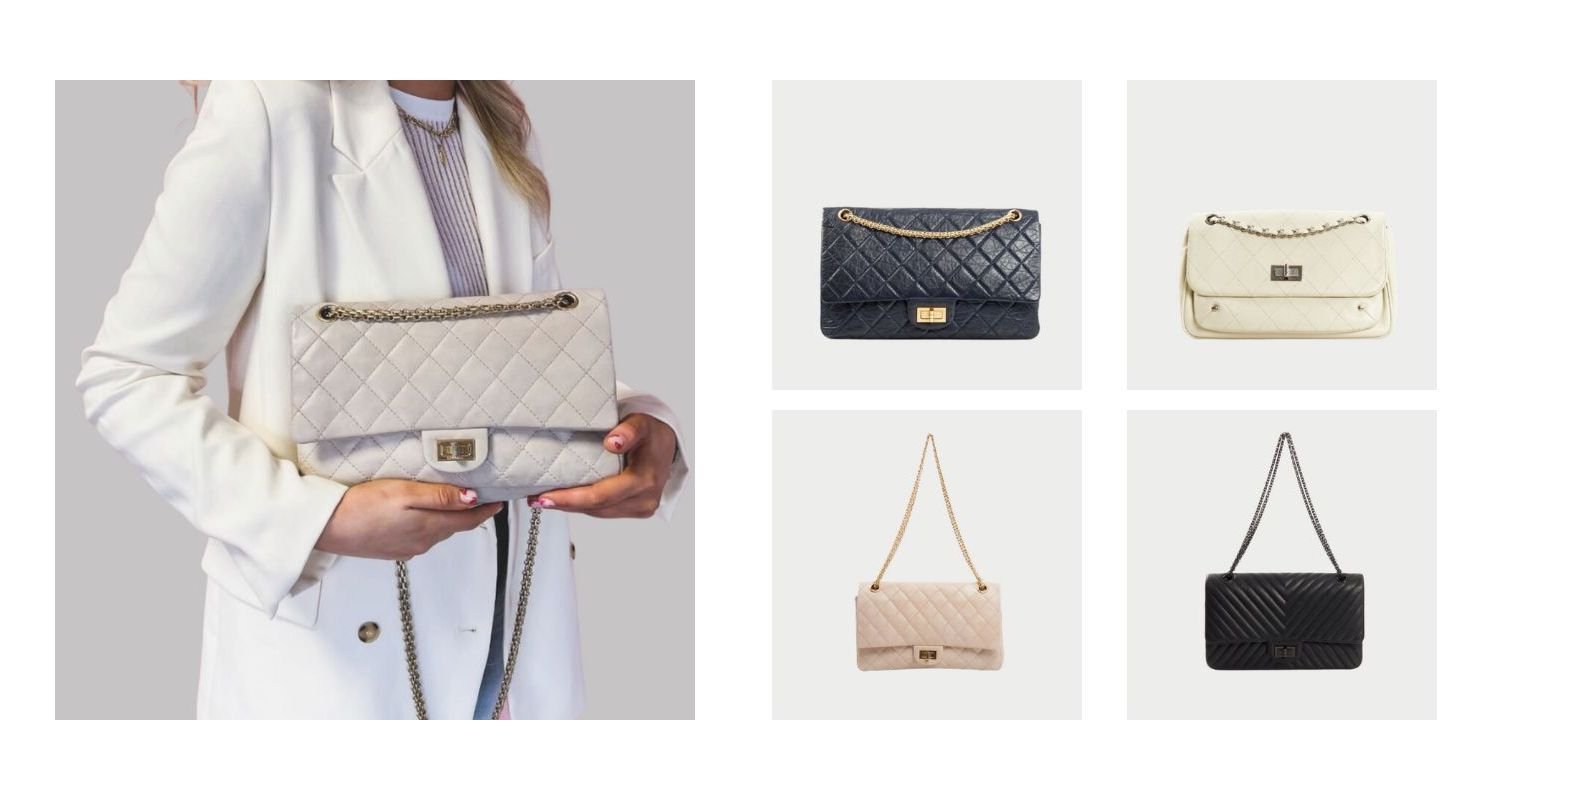 Coco Chanel designed the 2.55 in 1955 and was the first bag truly created with women in mind, by offering a practical shoulder strap. Shop at The handbag Clinic today